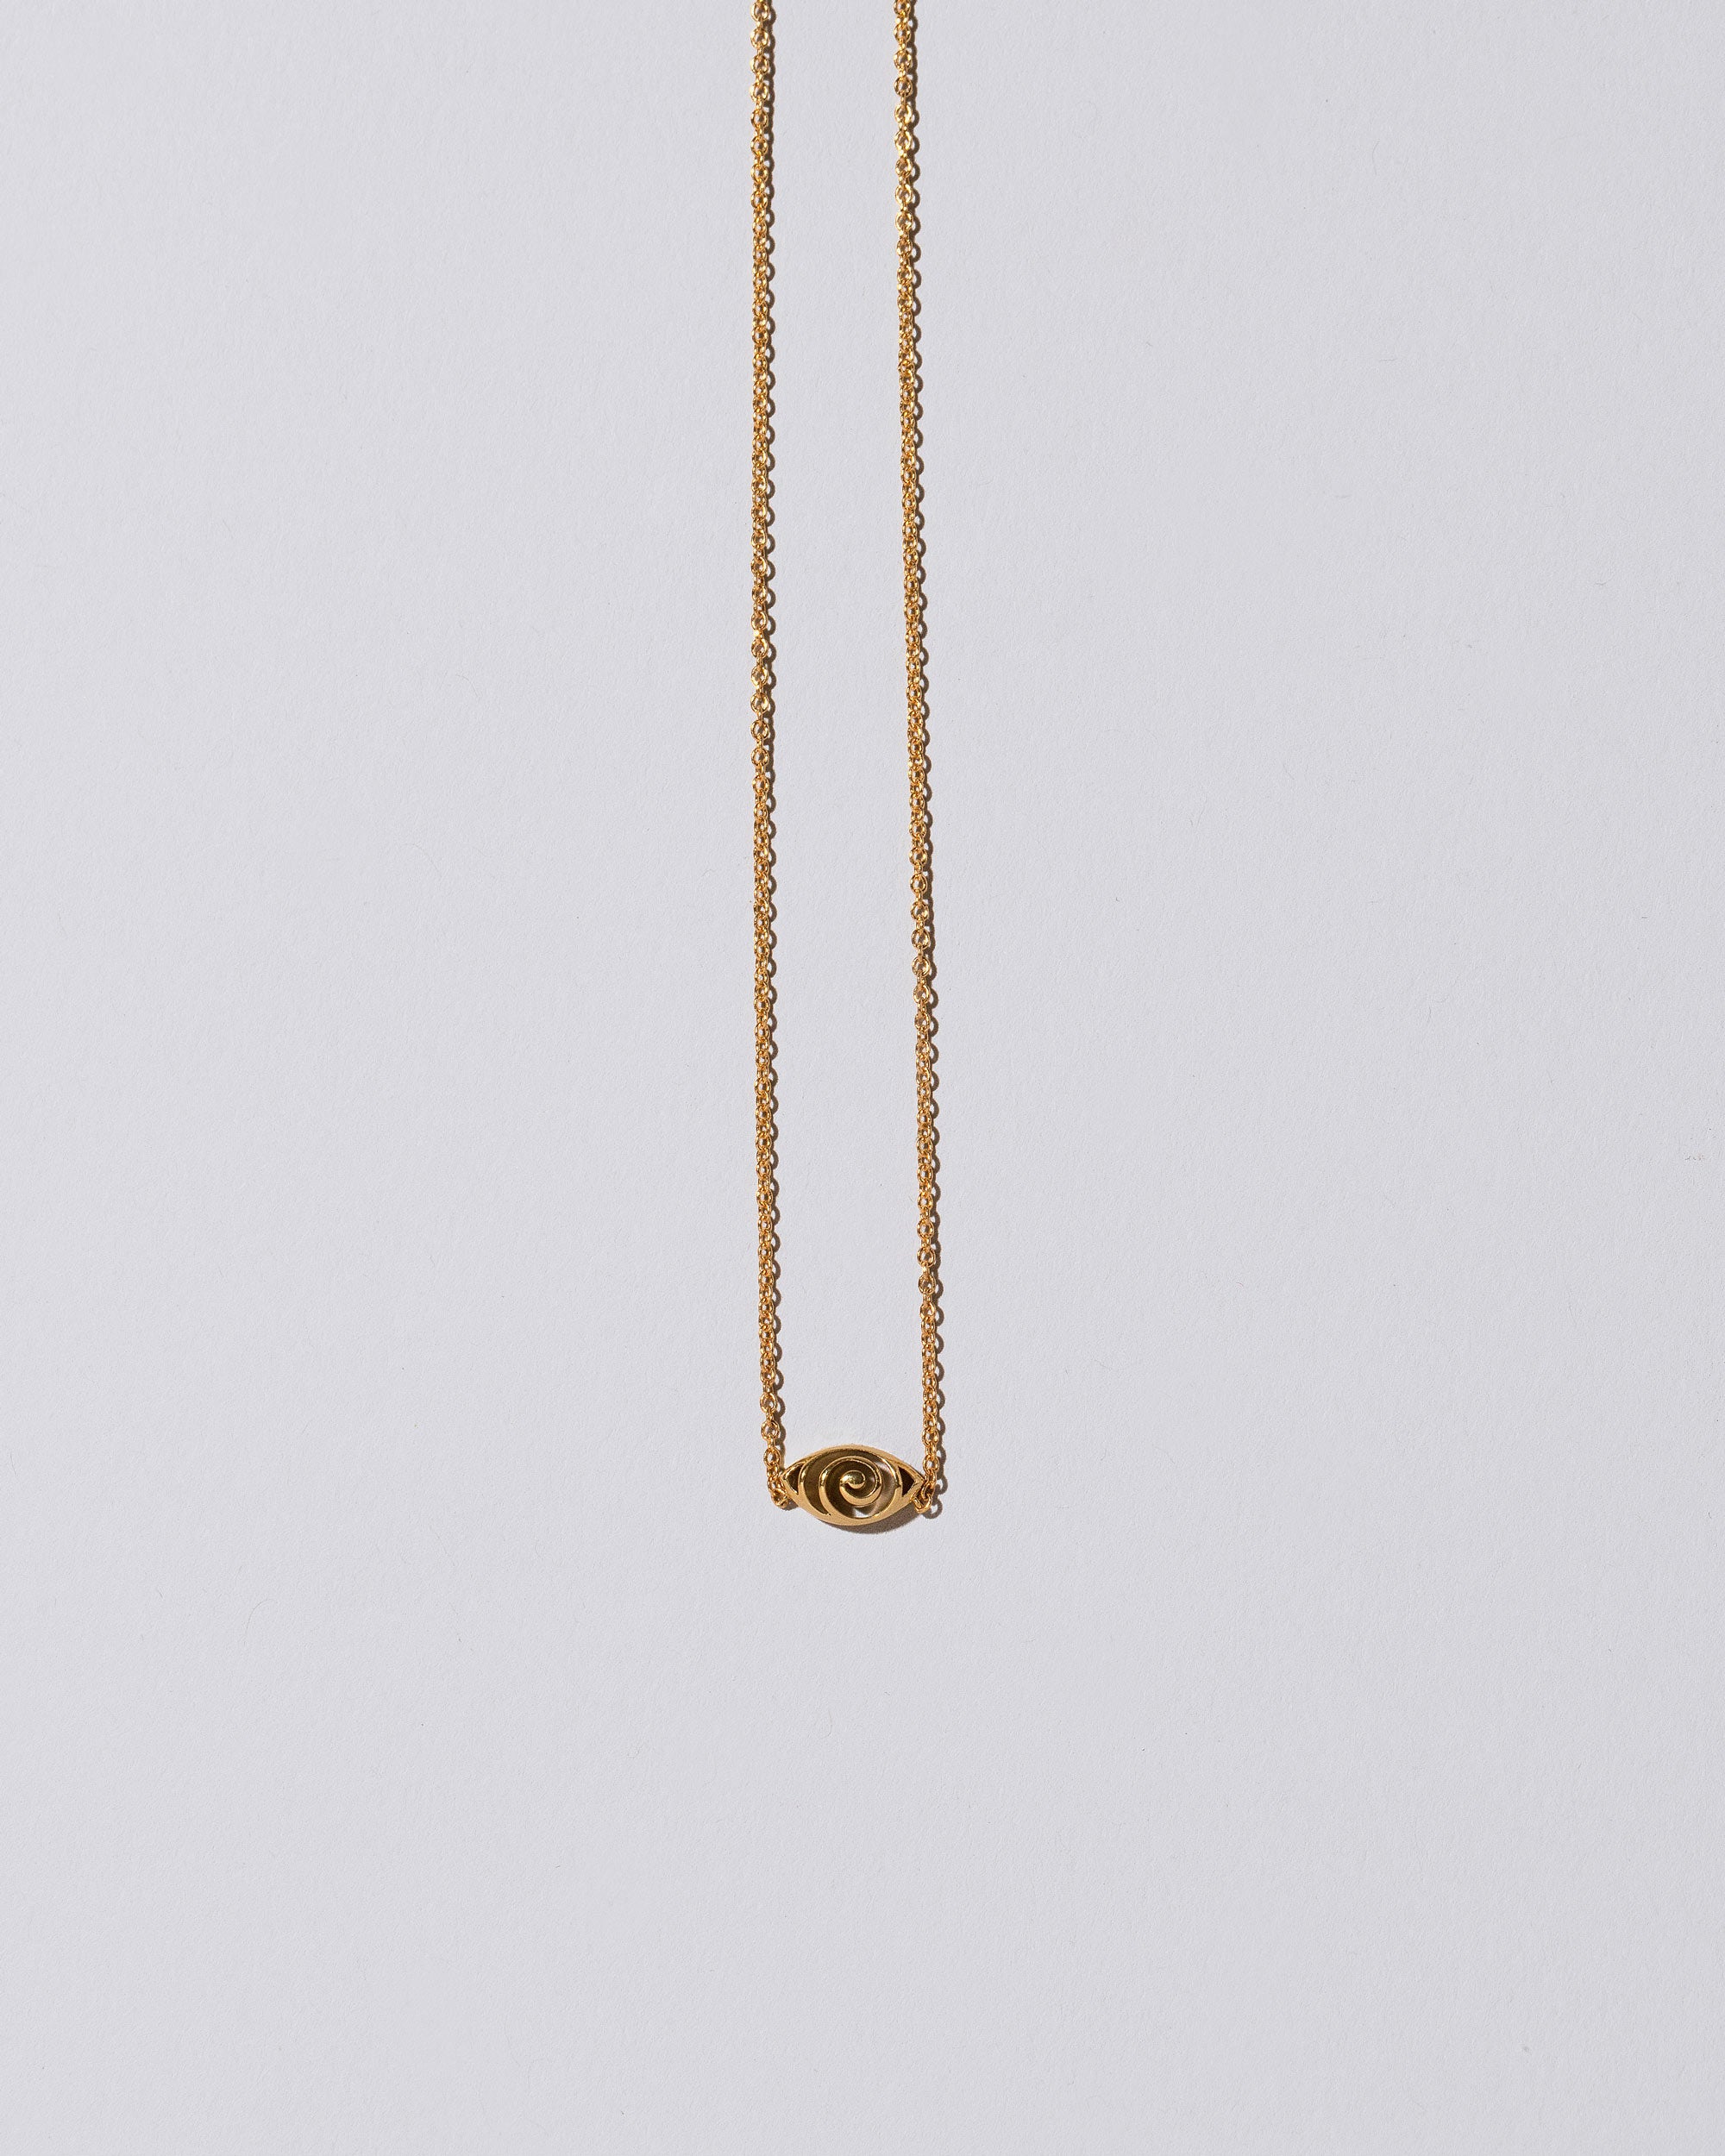 5 Gold Snake Chain Necklaces You Need In Your Jewelry Box